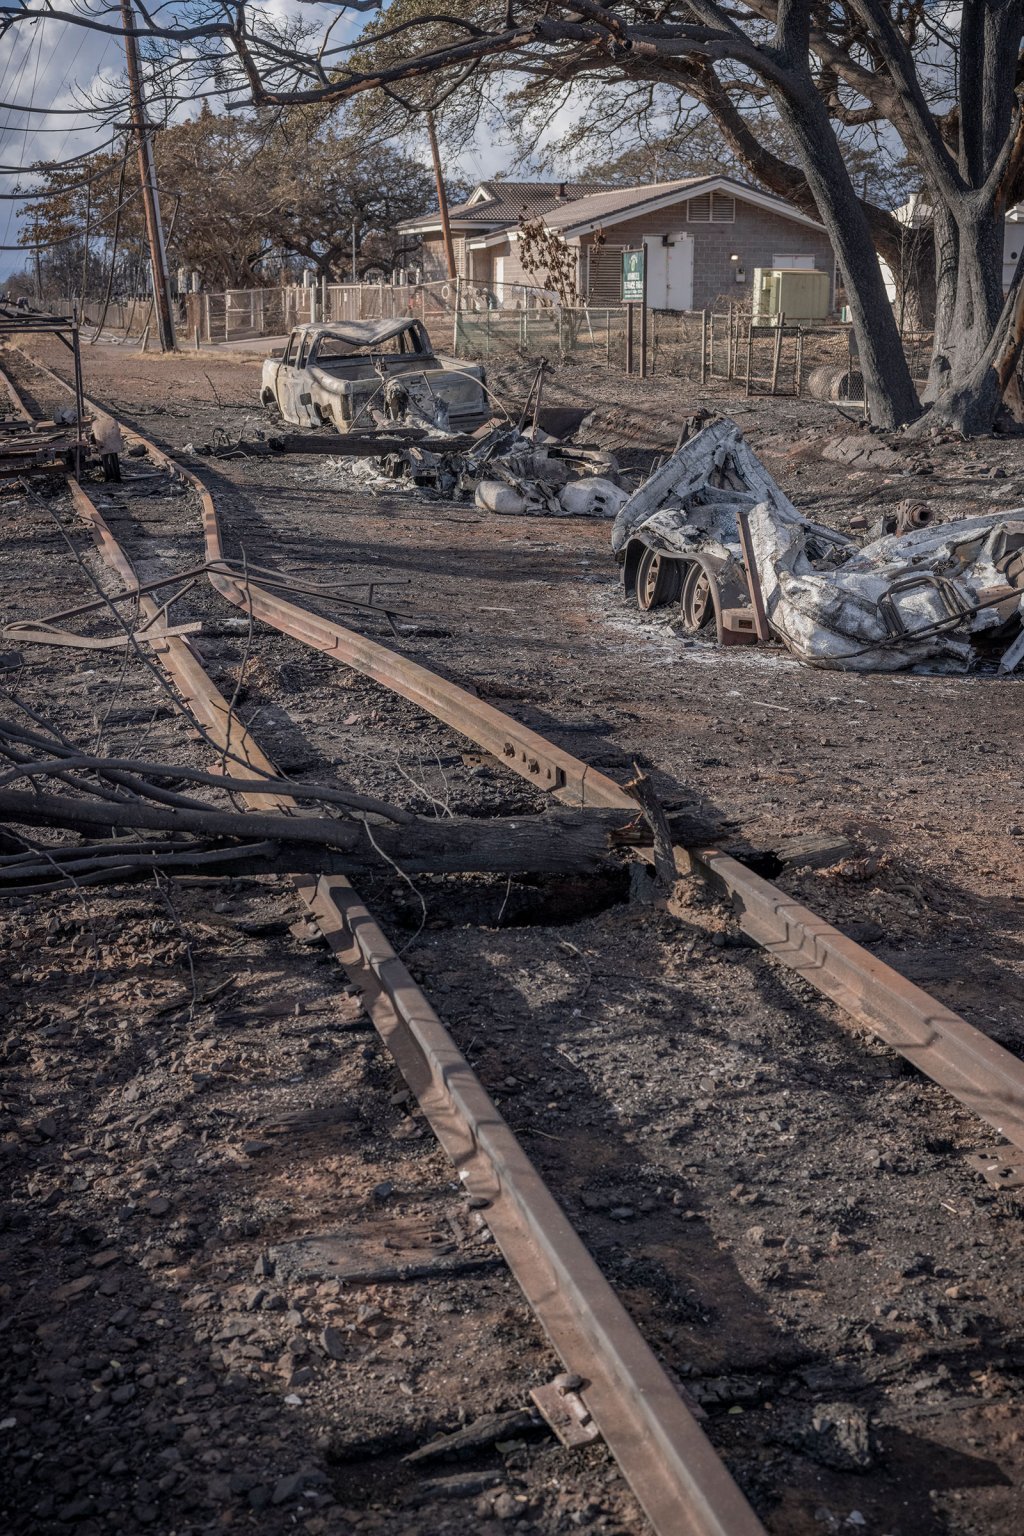 Scenes of devastation where deadly fires swept through Lahaina, on Aug. 14. David Butow for TIME